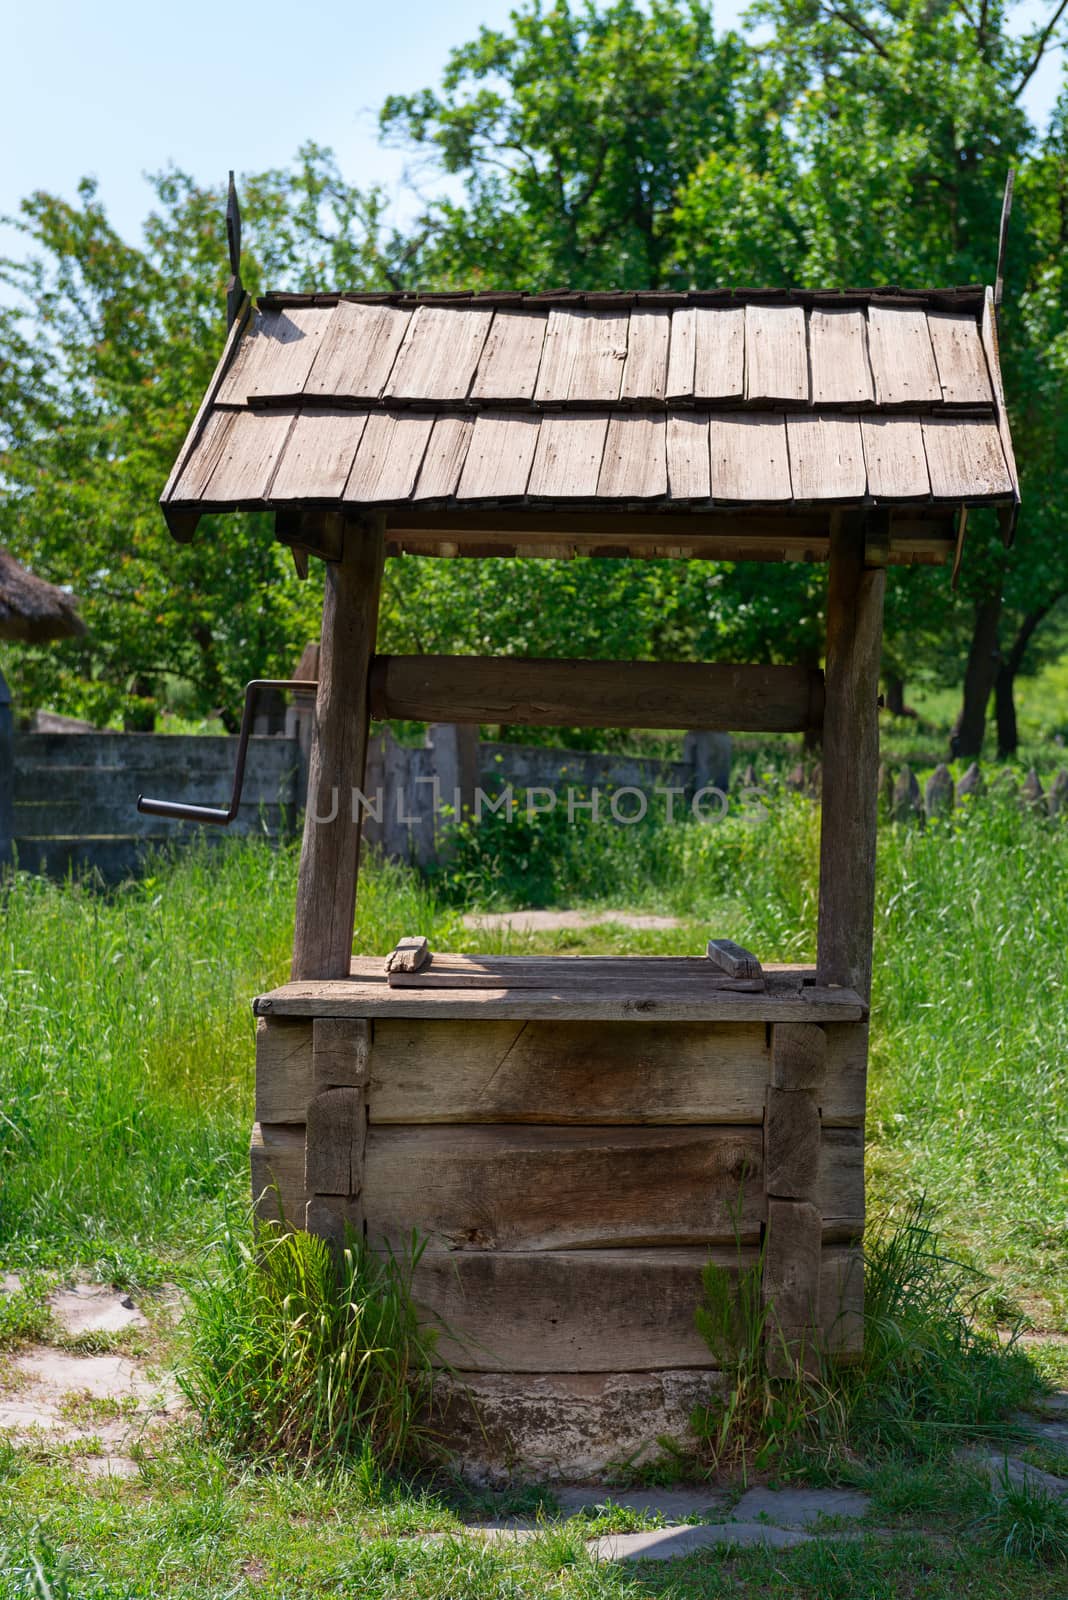 Old village well with a wood roof by iryna_rasko